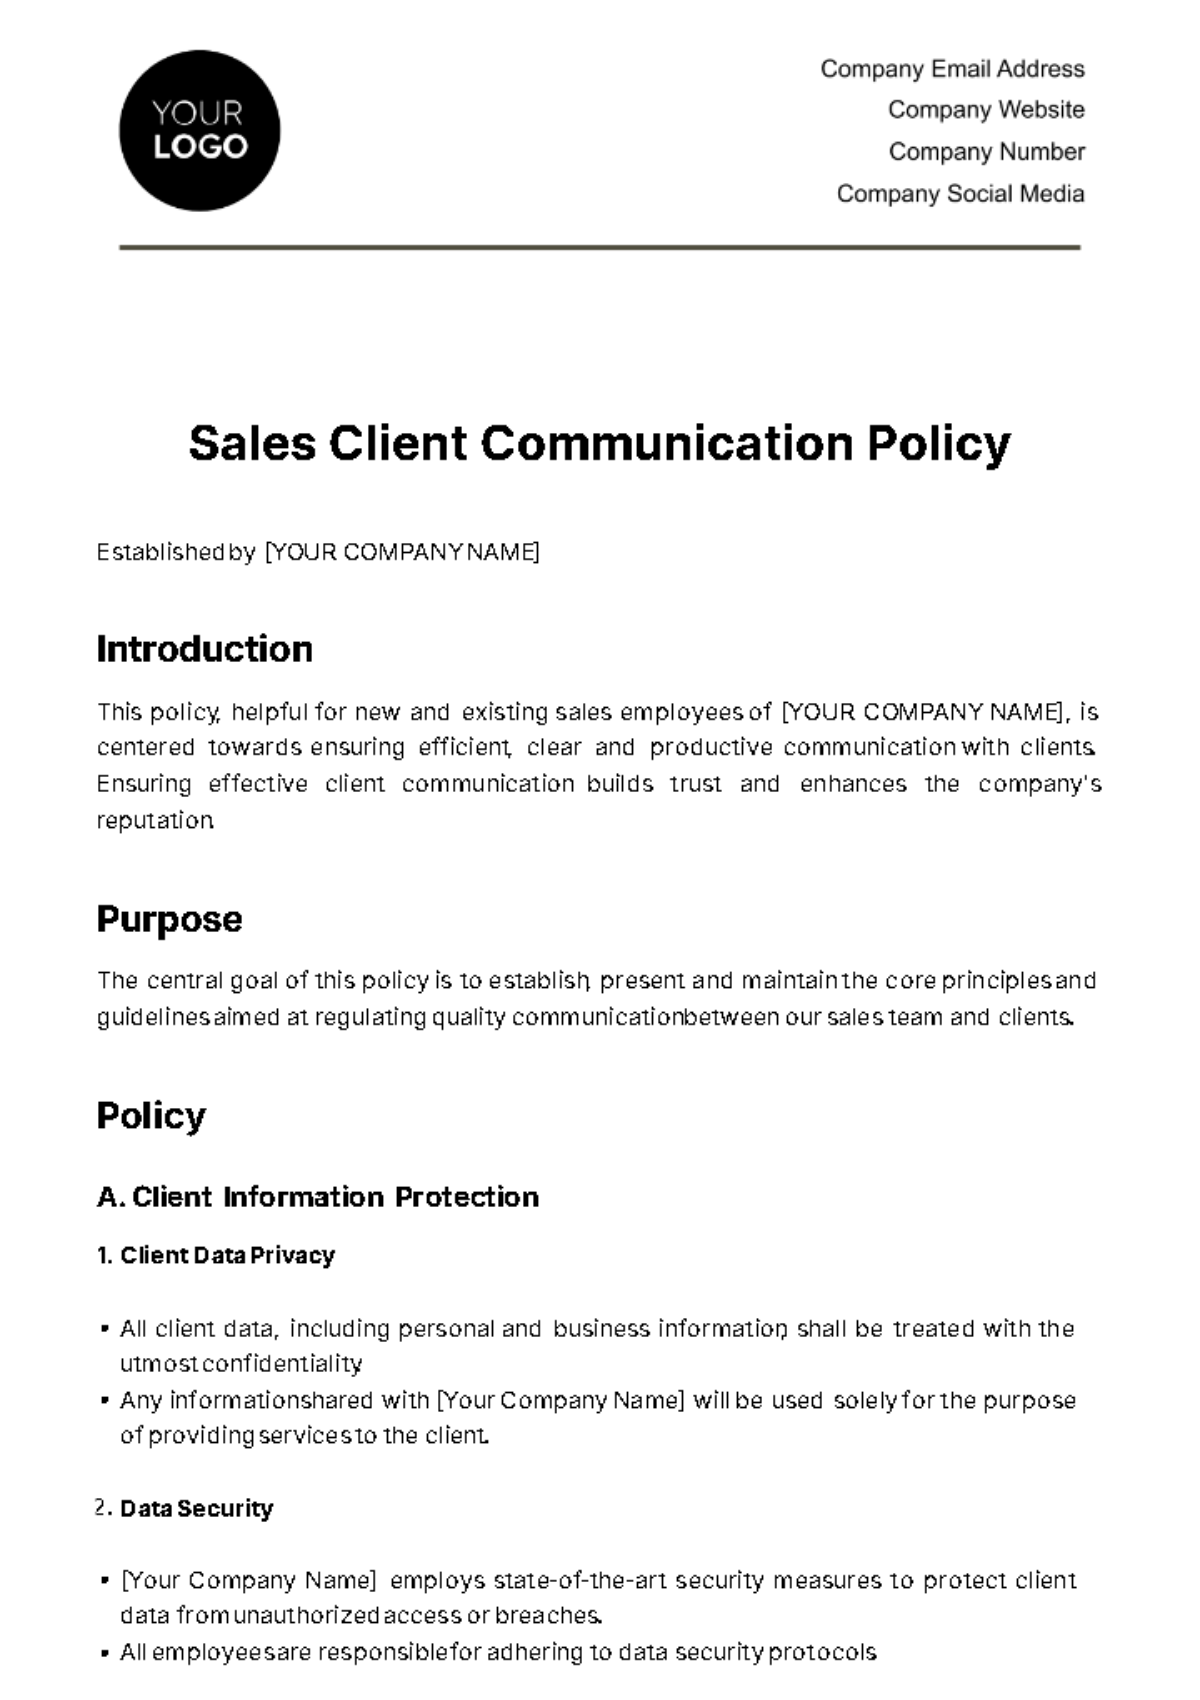 Sales Client Communication Policy Template